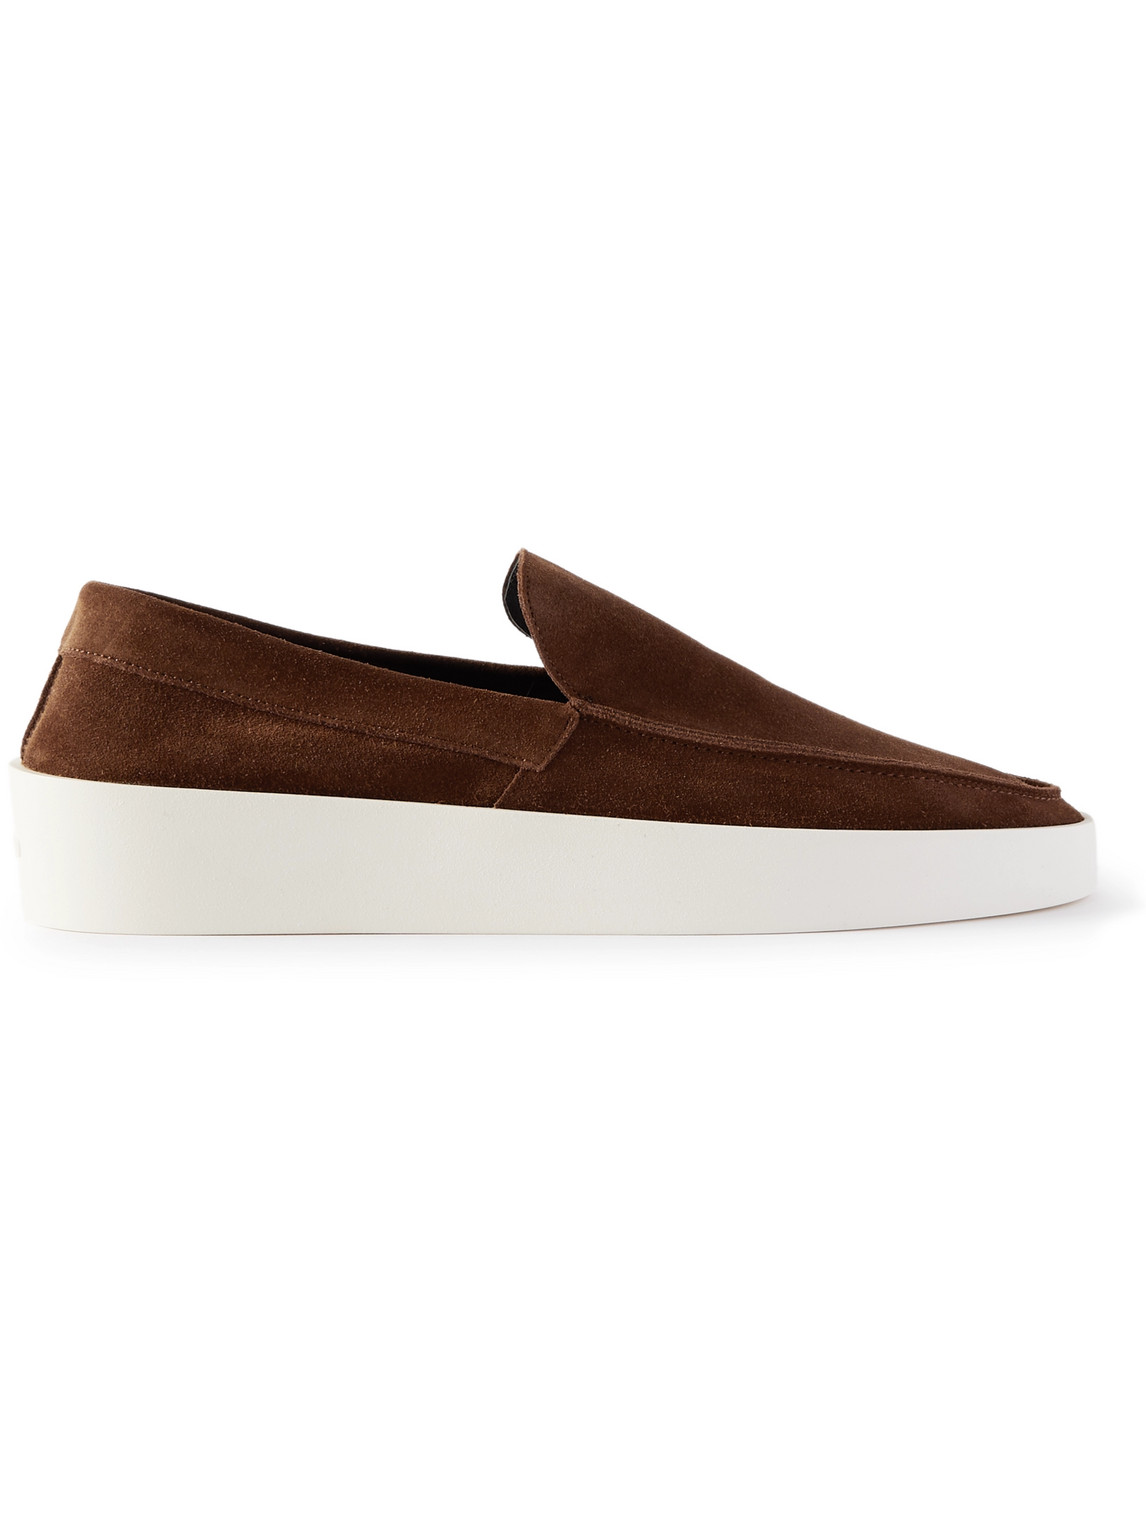 FEAR OF GOD REVERSE SUEDE LOAFERS